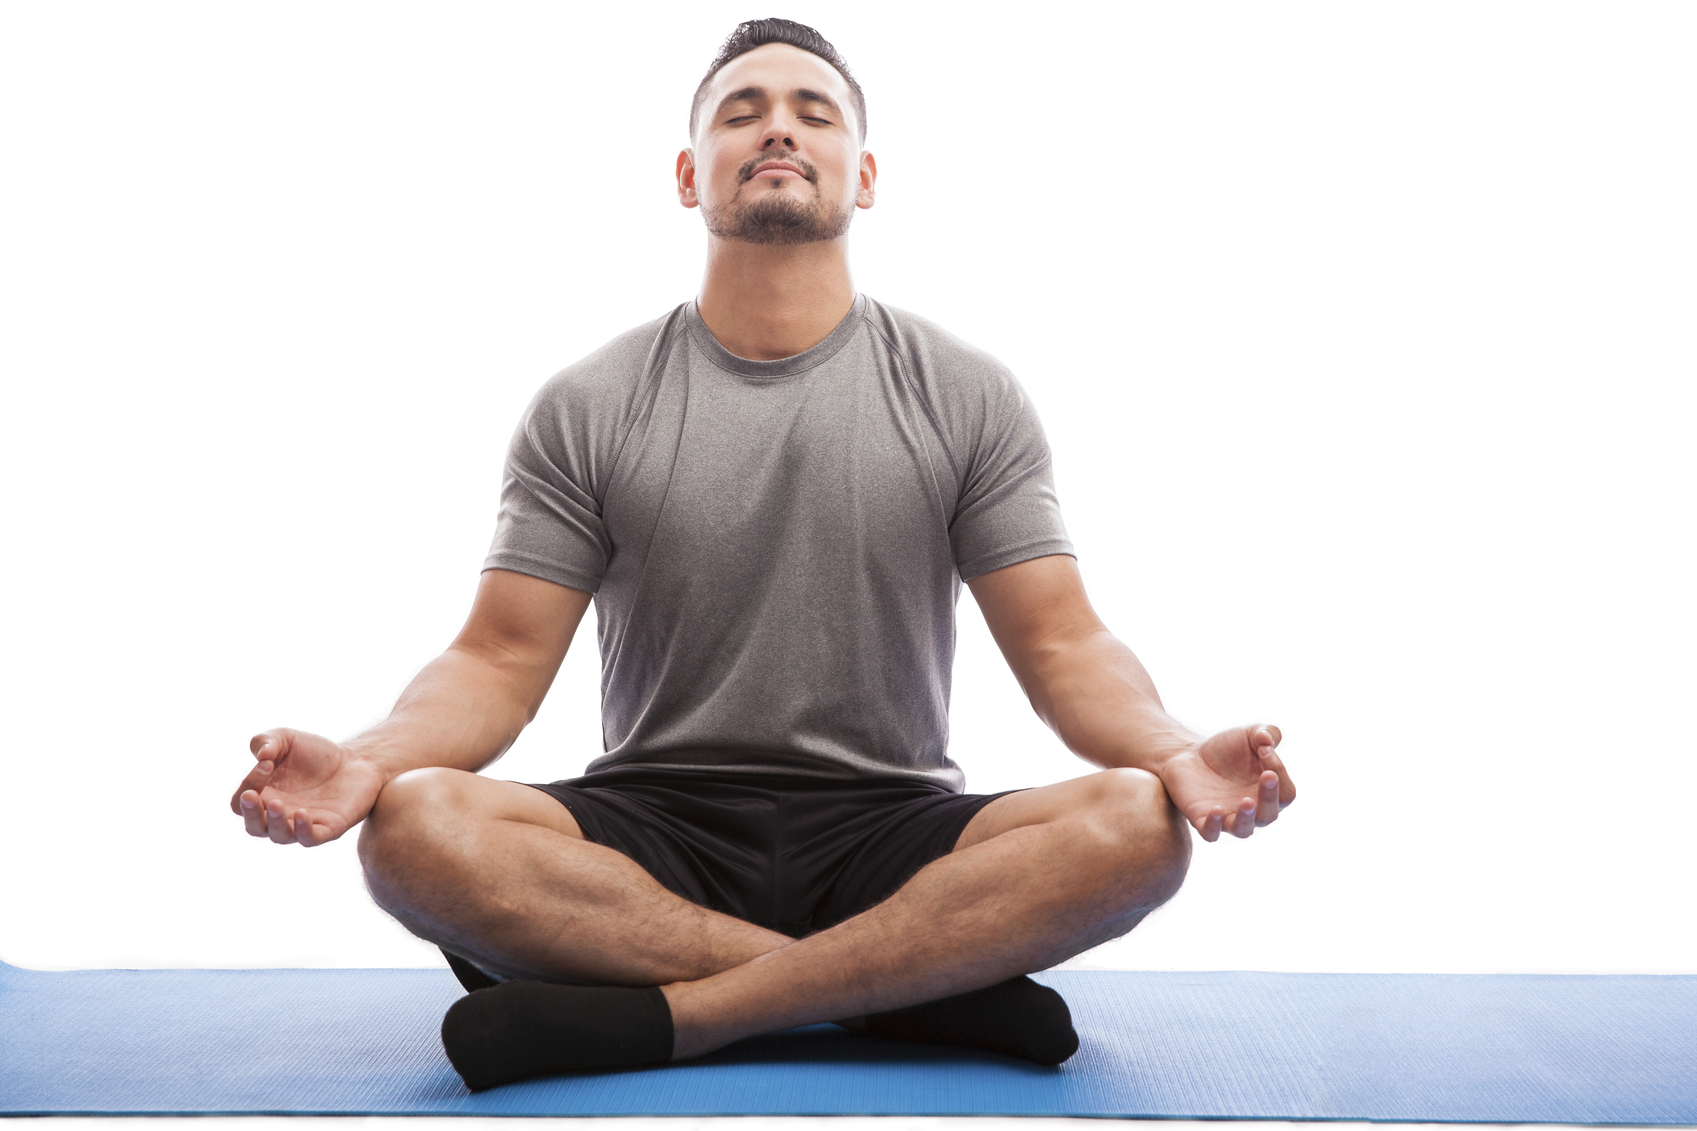 Young man in sporty outfit doing yoga and meditating on an exercise mat against a white background